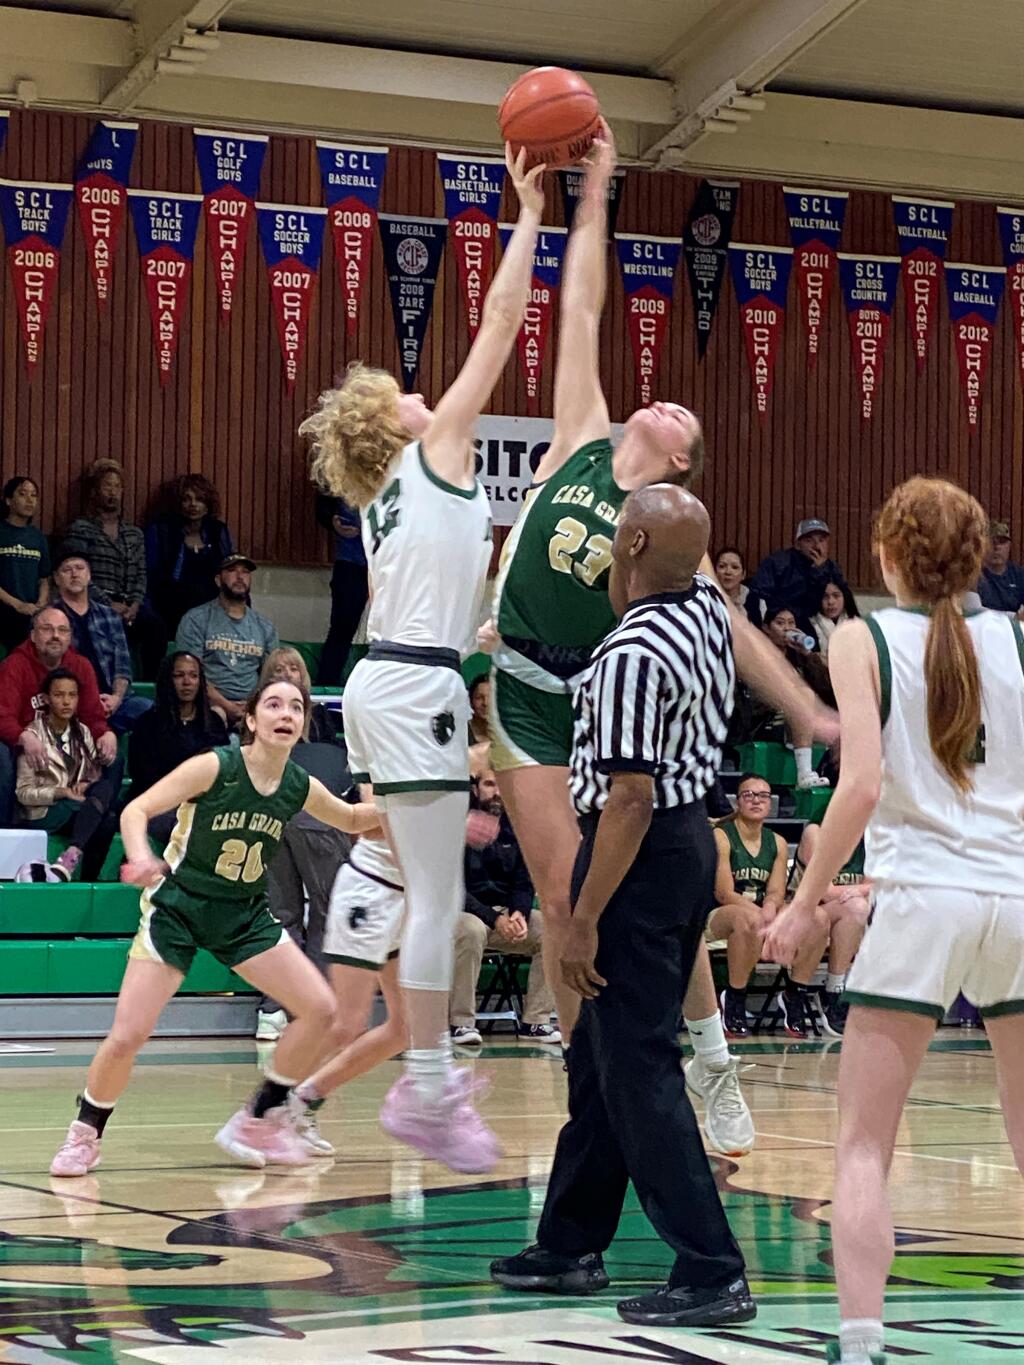 The Dragon girls beat Casa Grande High School on Jan. 21, with a final score of 46-38. (Photo courtesy Anne Cassidy)